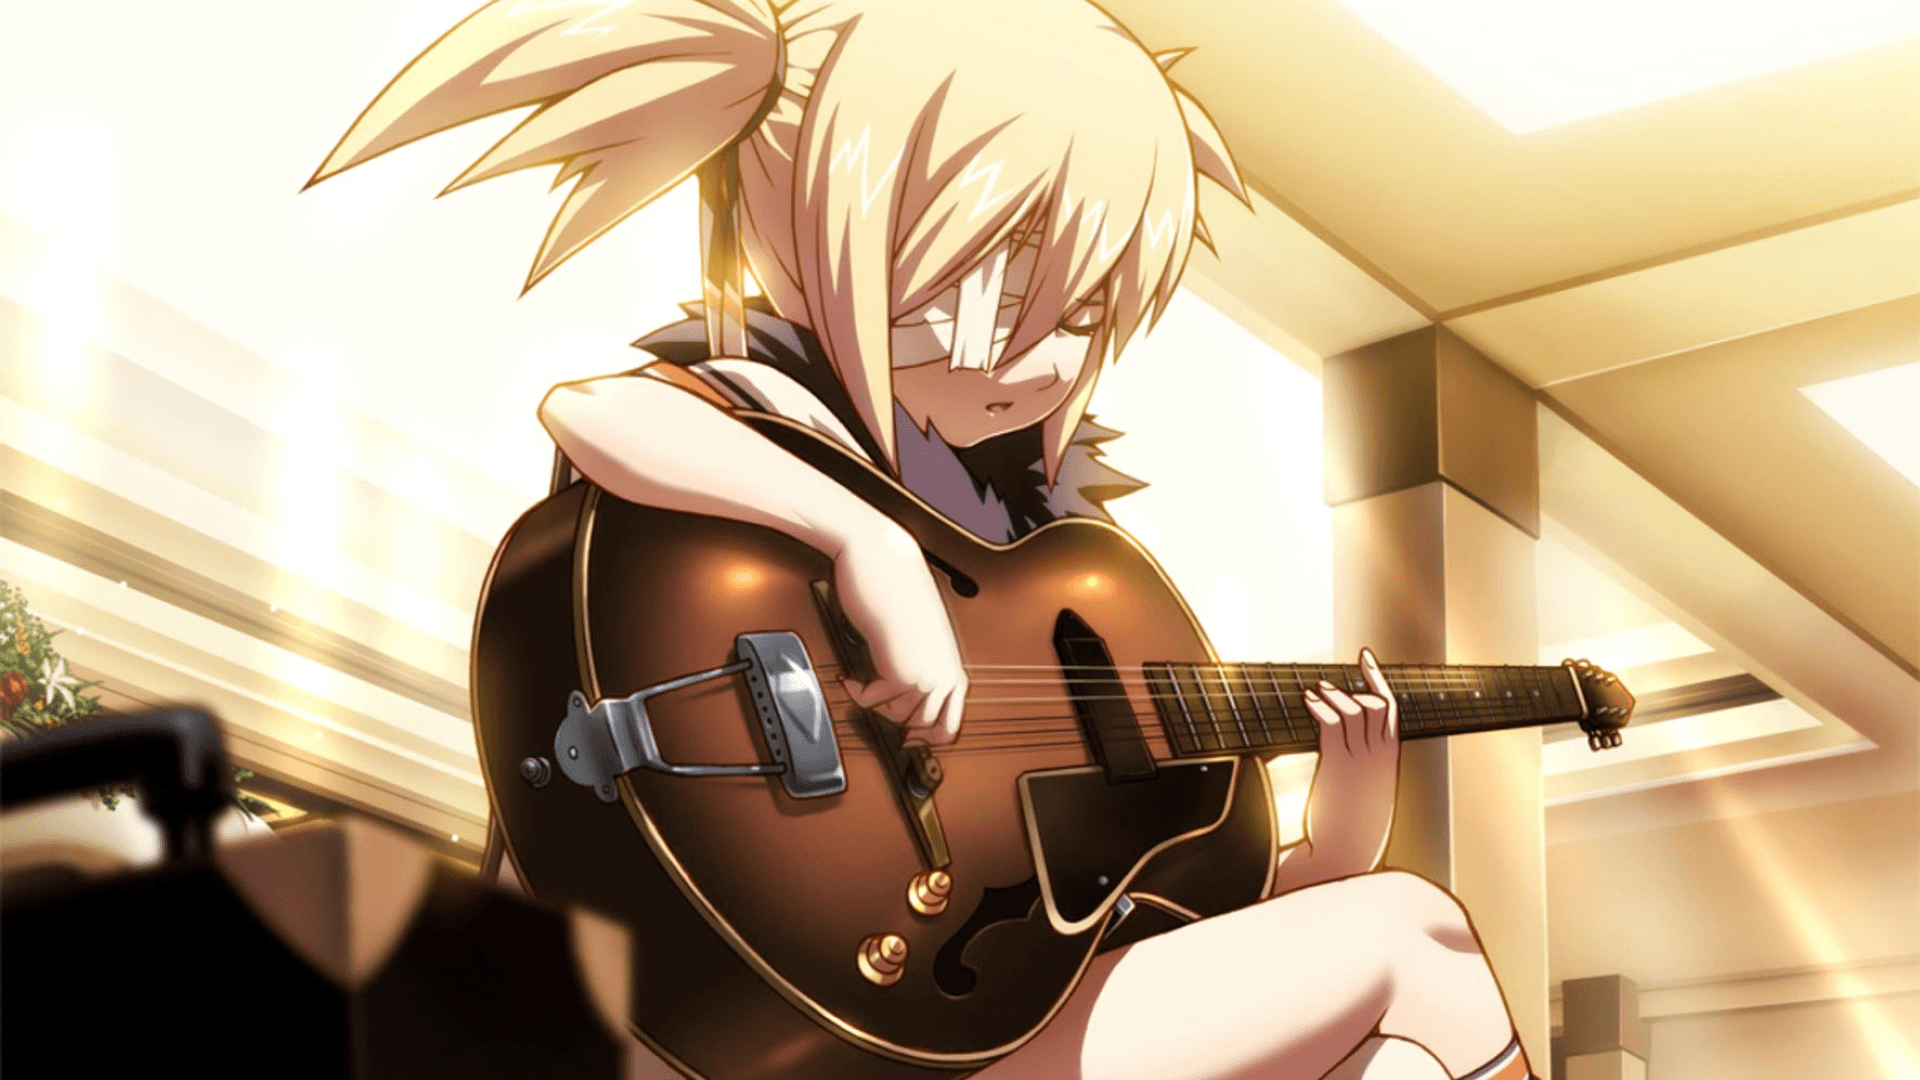 1080x2280 Anime Girl With Guitar Watching The Sunset 4k One Plus 6,Huawei  p20,Honor view 10,Vivo y85,Oppo f7,Xiaomi Mi A2 HD 4k Wallpapers, Images,  Backgrounds, Photos and Pictures